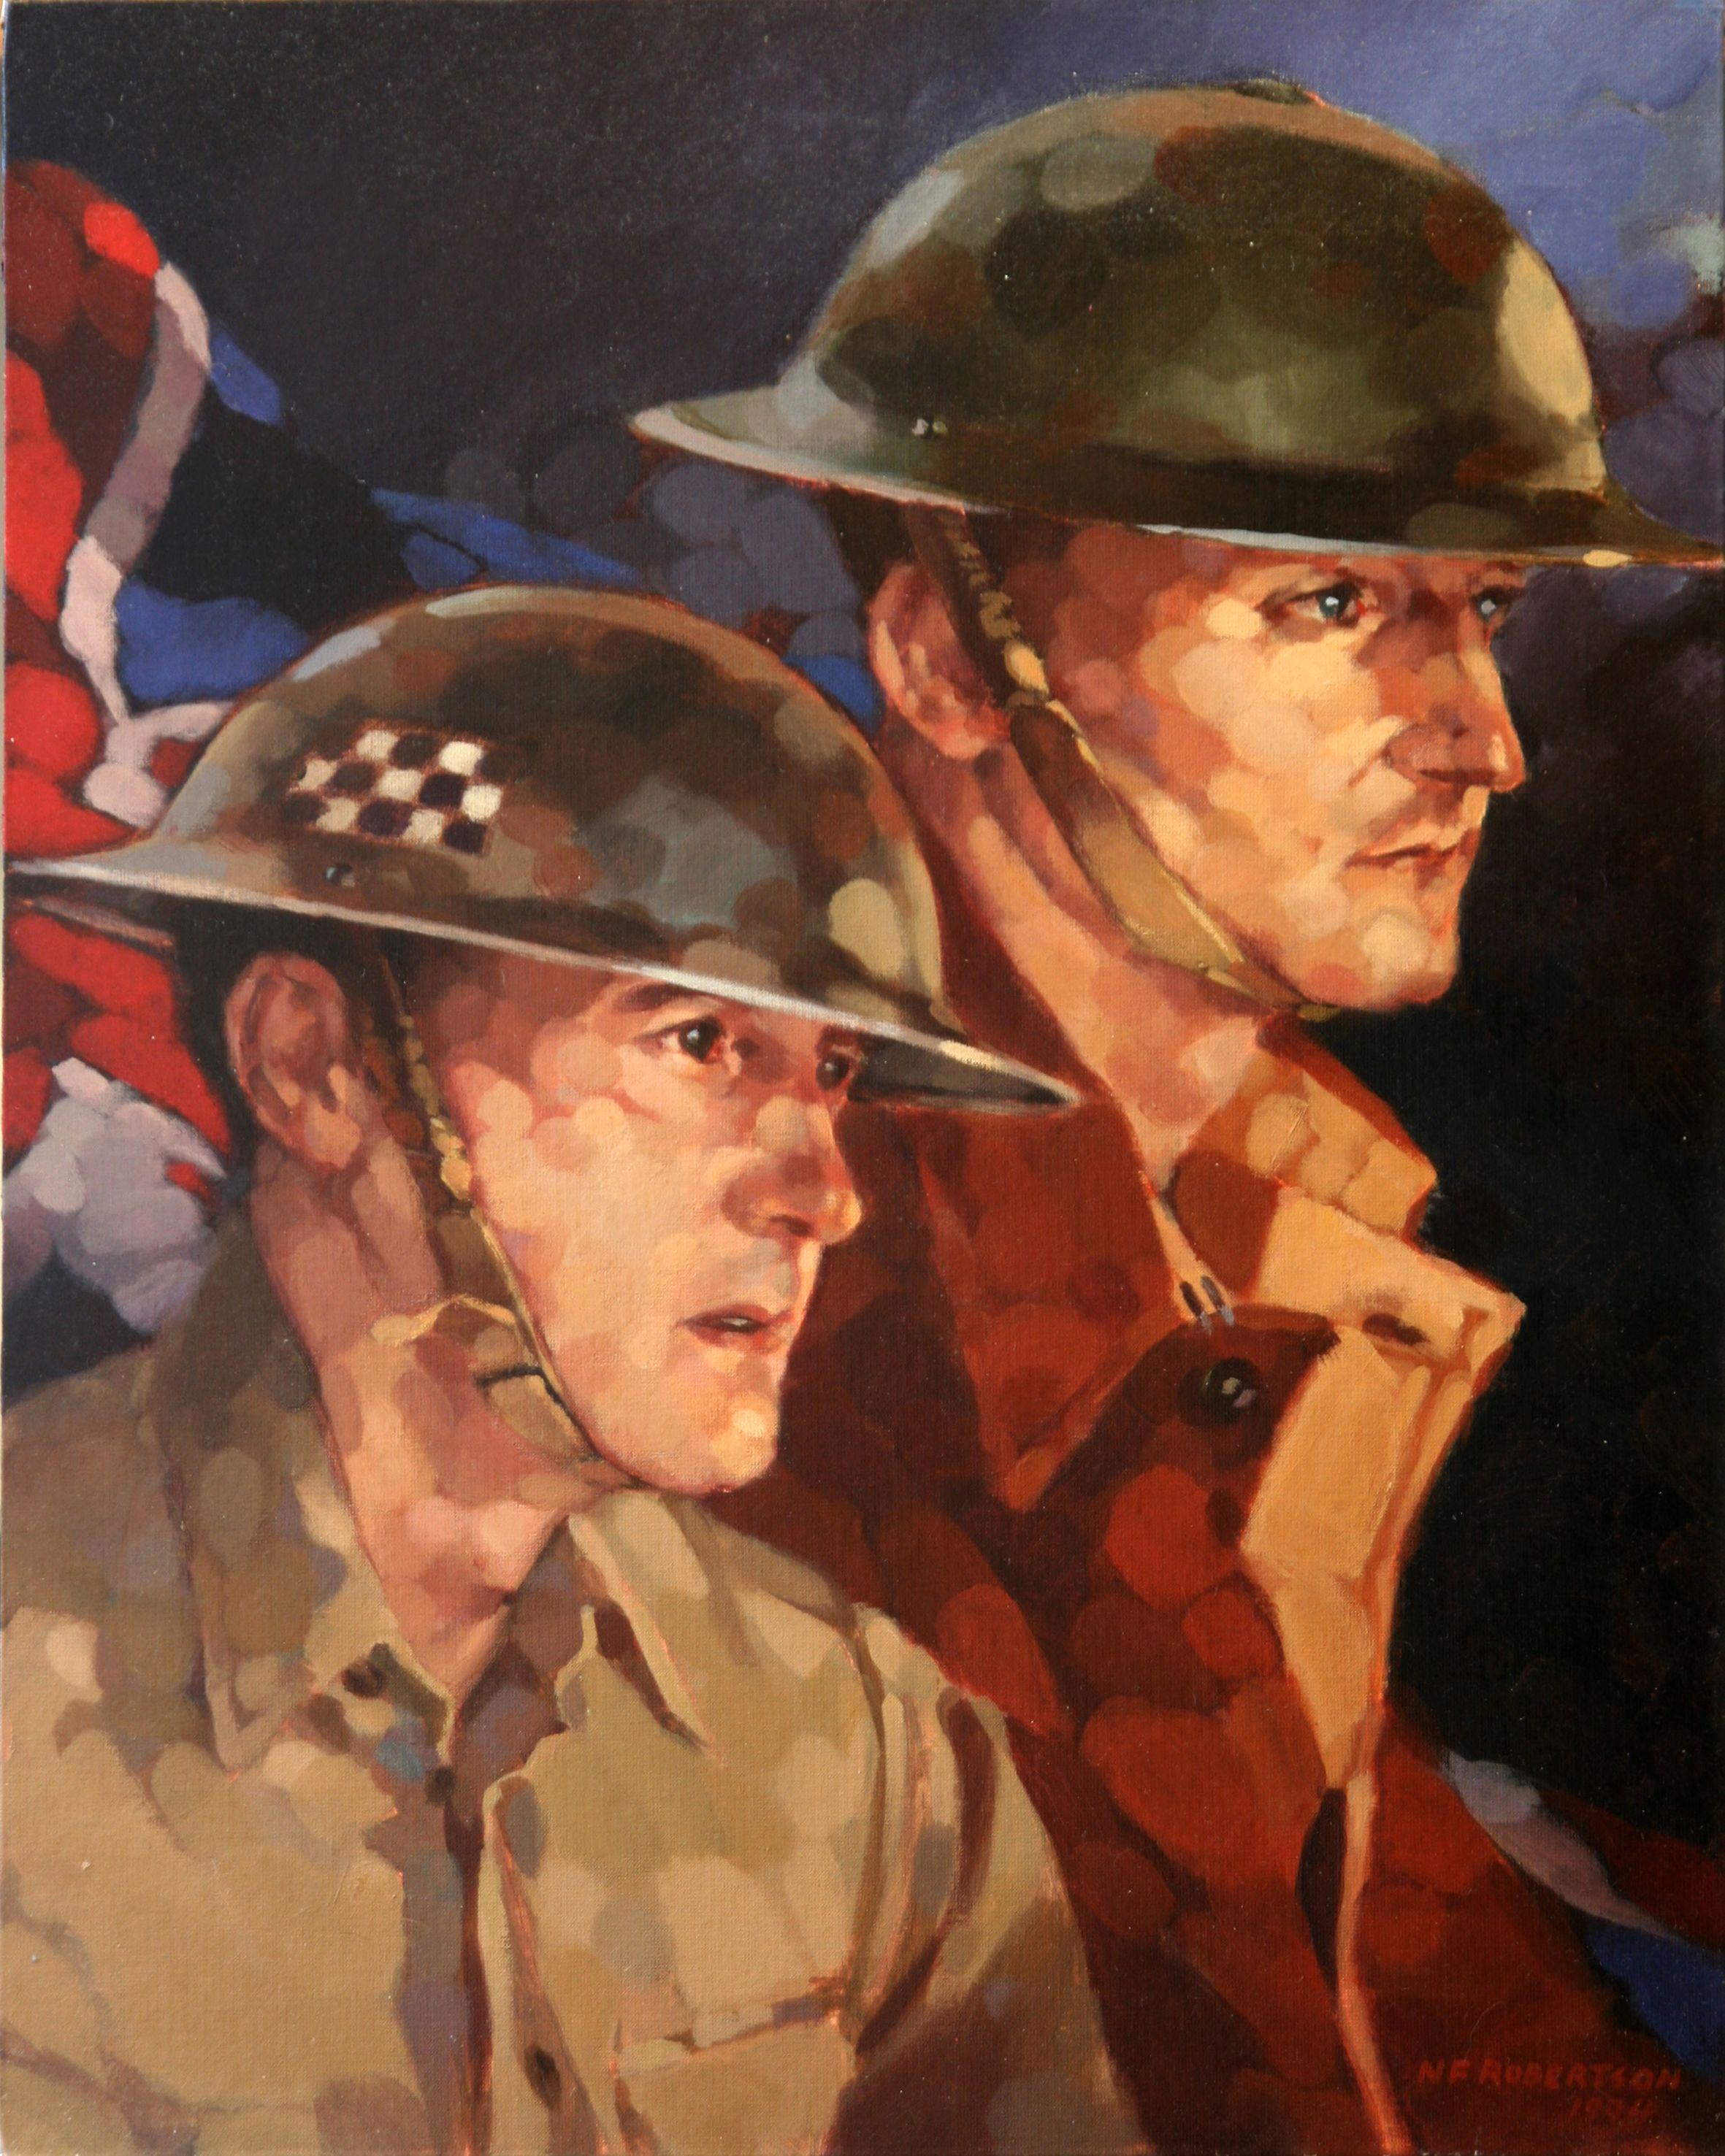 This sample work was undertaken to secure a British Army regimental commission for a military mural painting. Changing financial circumstances were cited by our then agent as to why the commission was unfulfilled. The models were myself and my